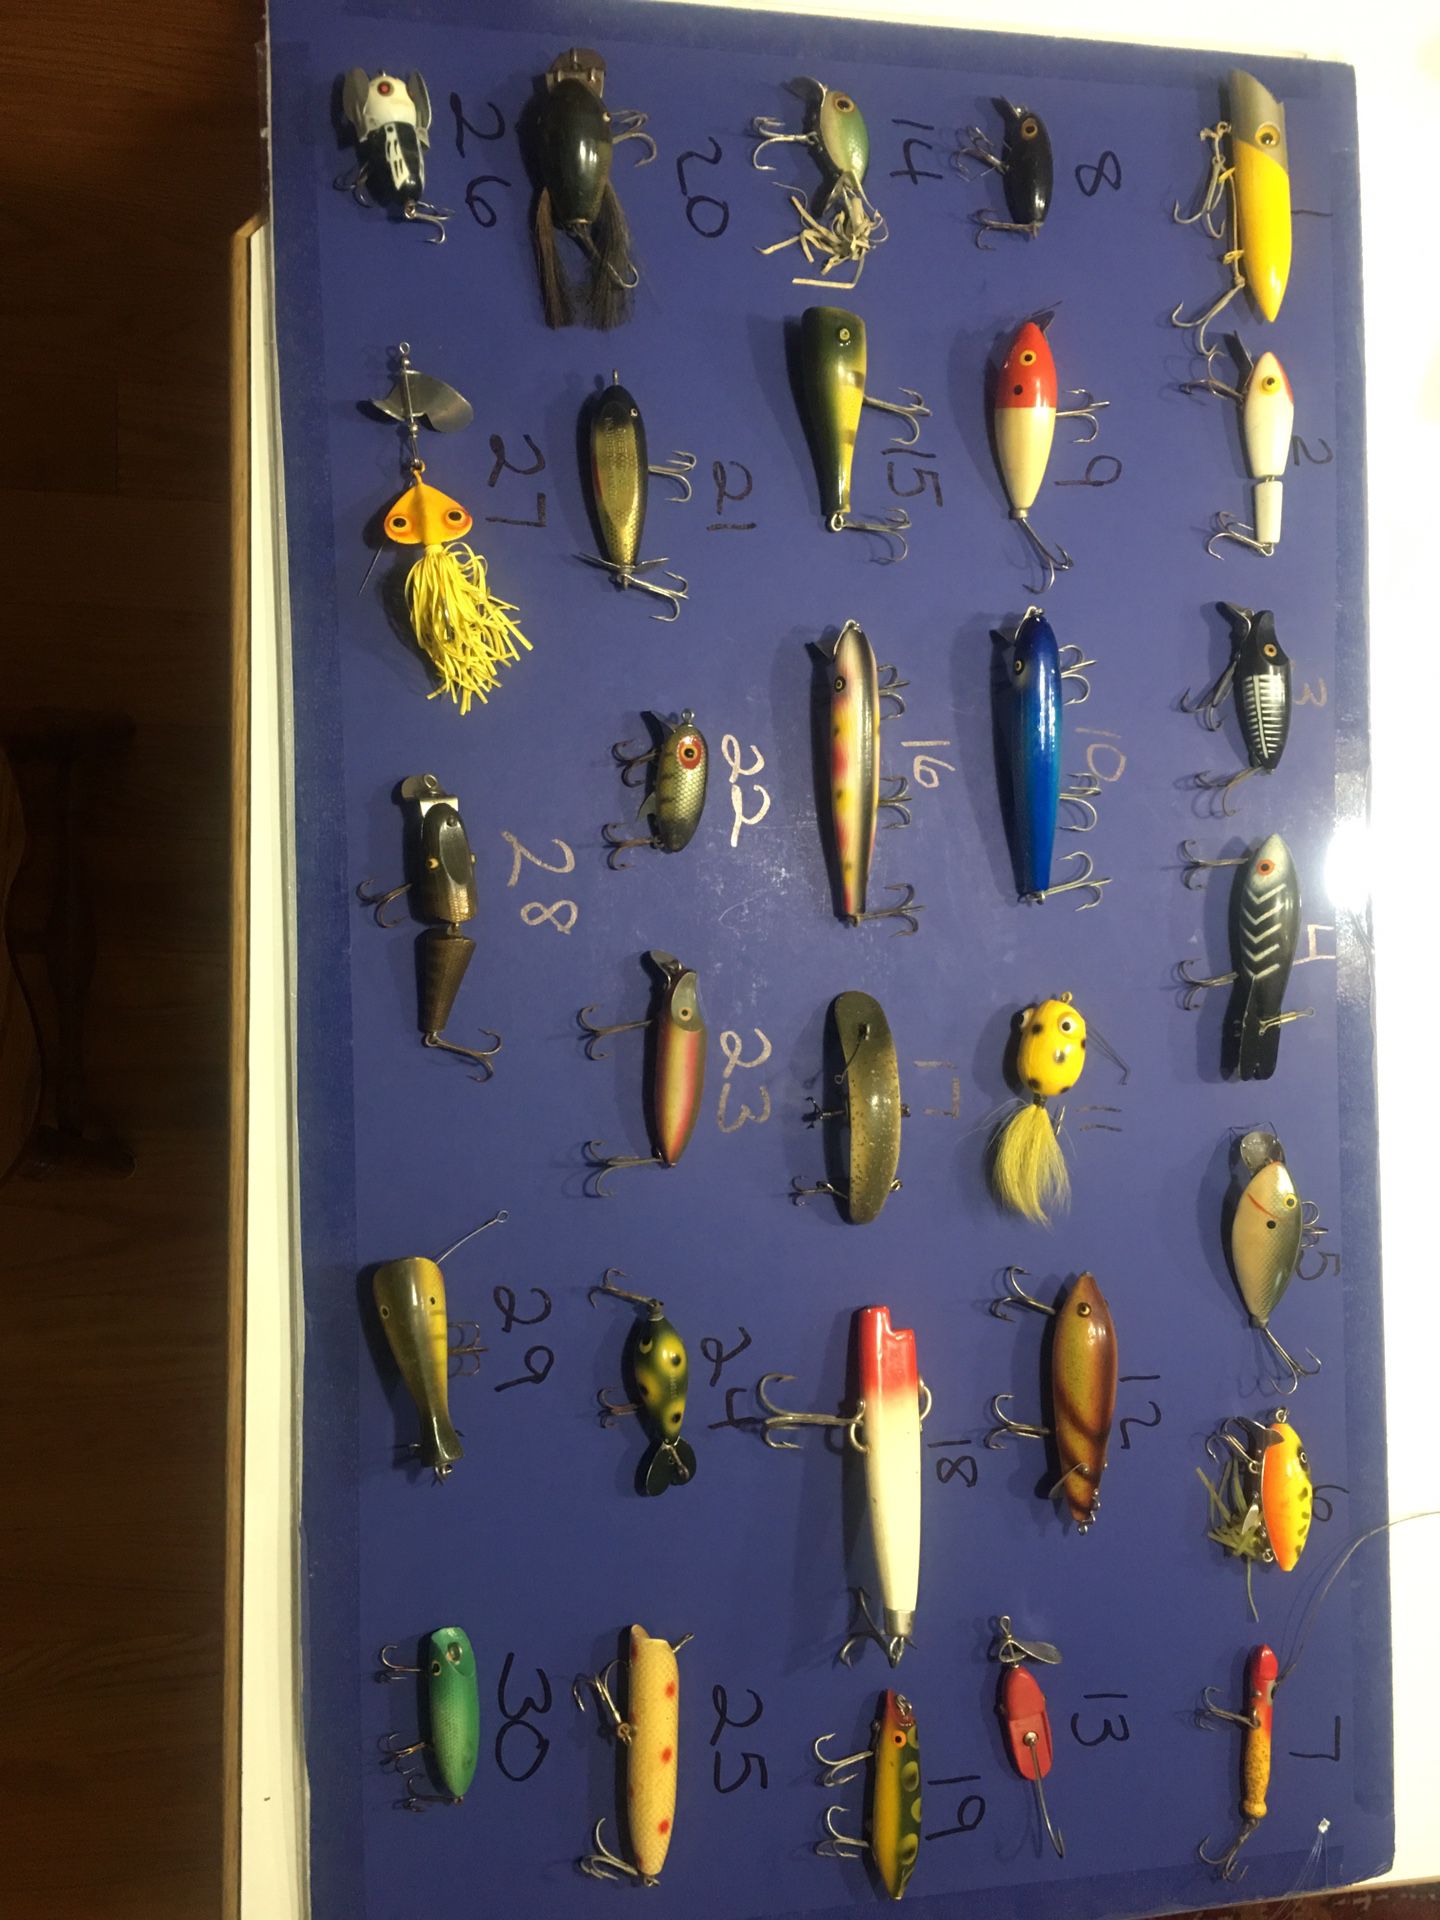 Group A fishing lures